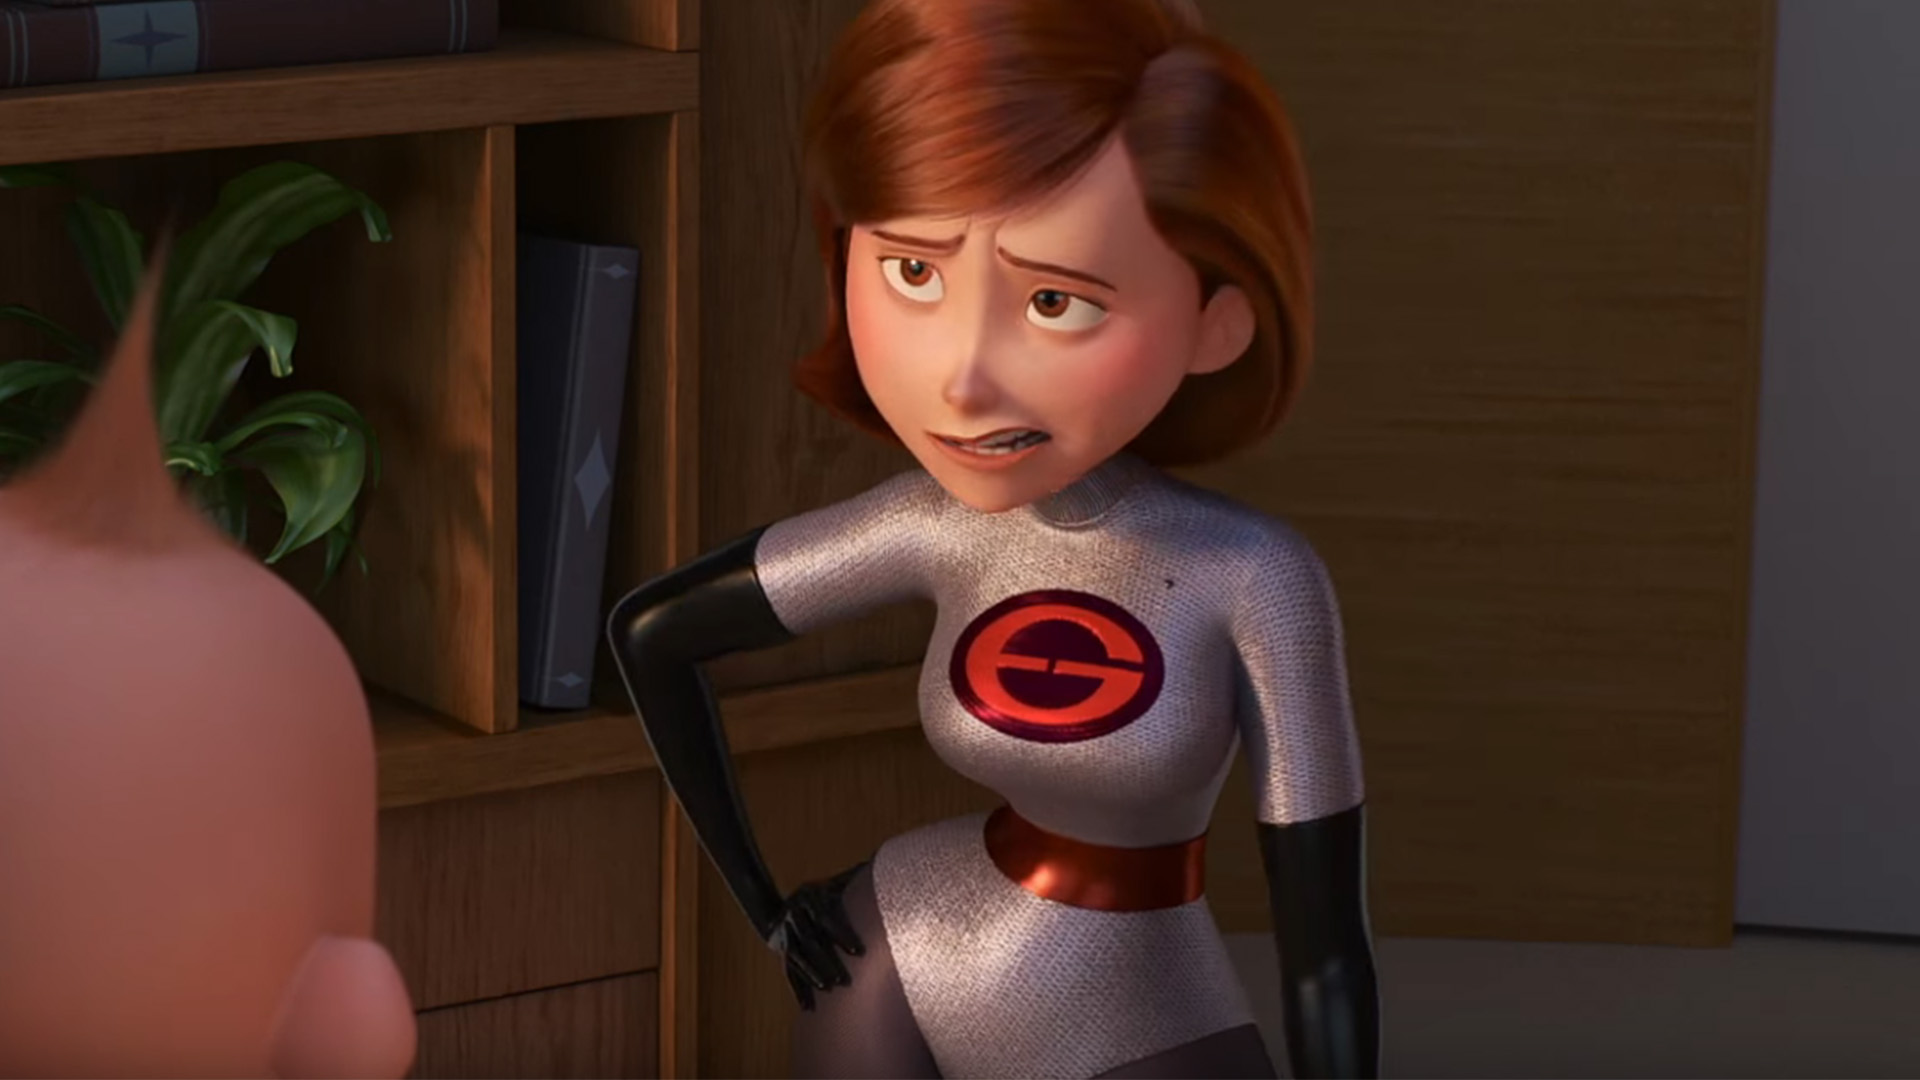 The Incredibles 2: Clip Shows Elastigirl Isn't Happy With Her New Suit - Purs...